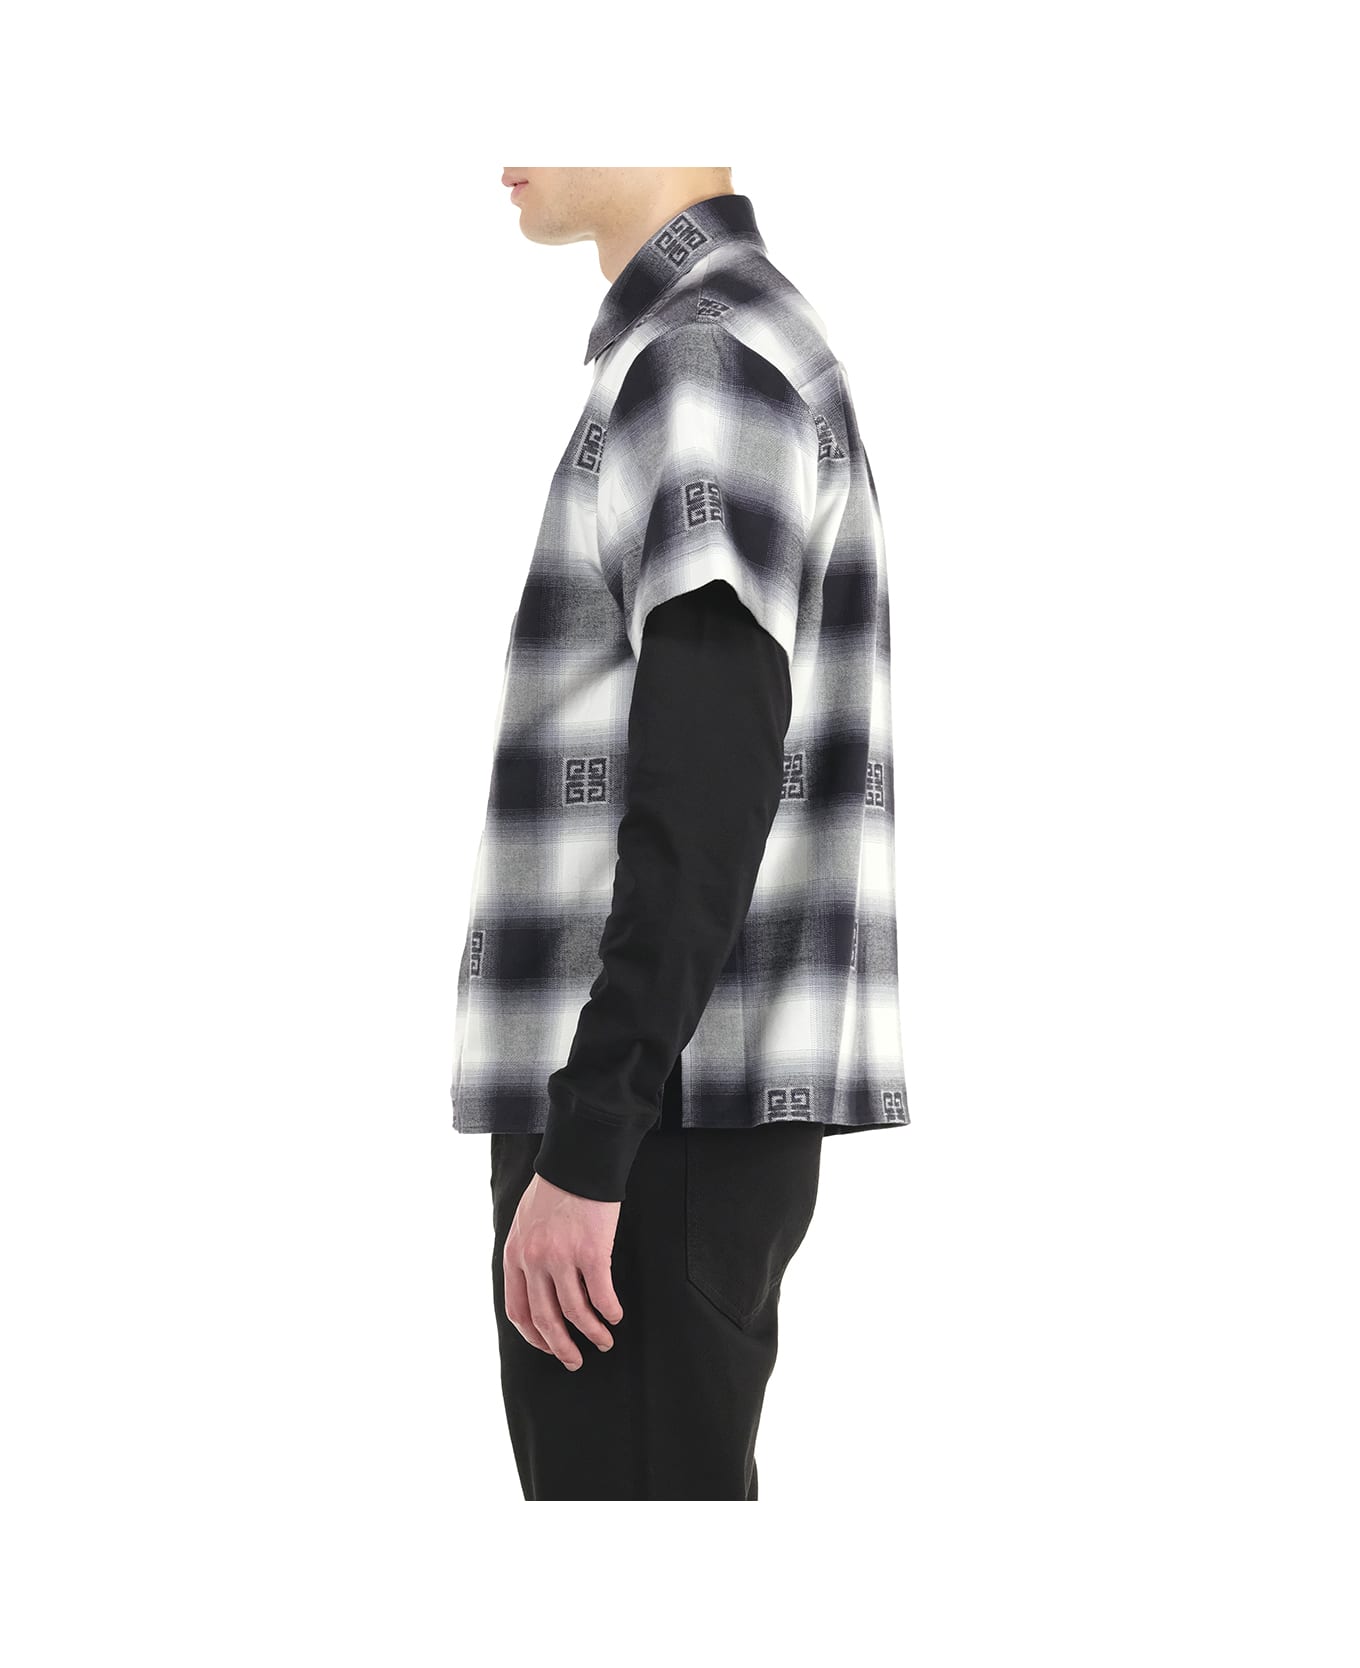 Givenchy Flannel Shirt - Multicolor シャツ